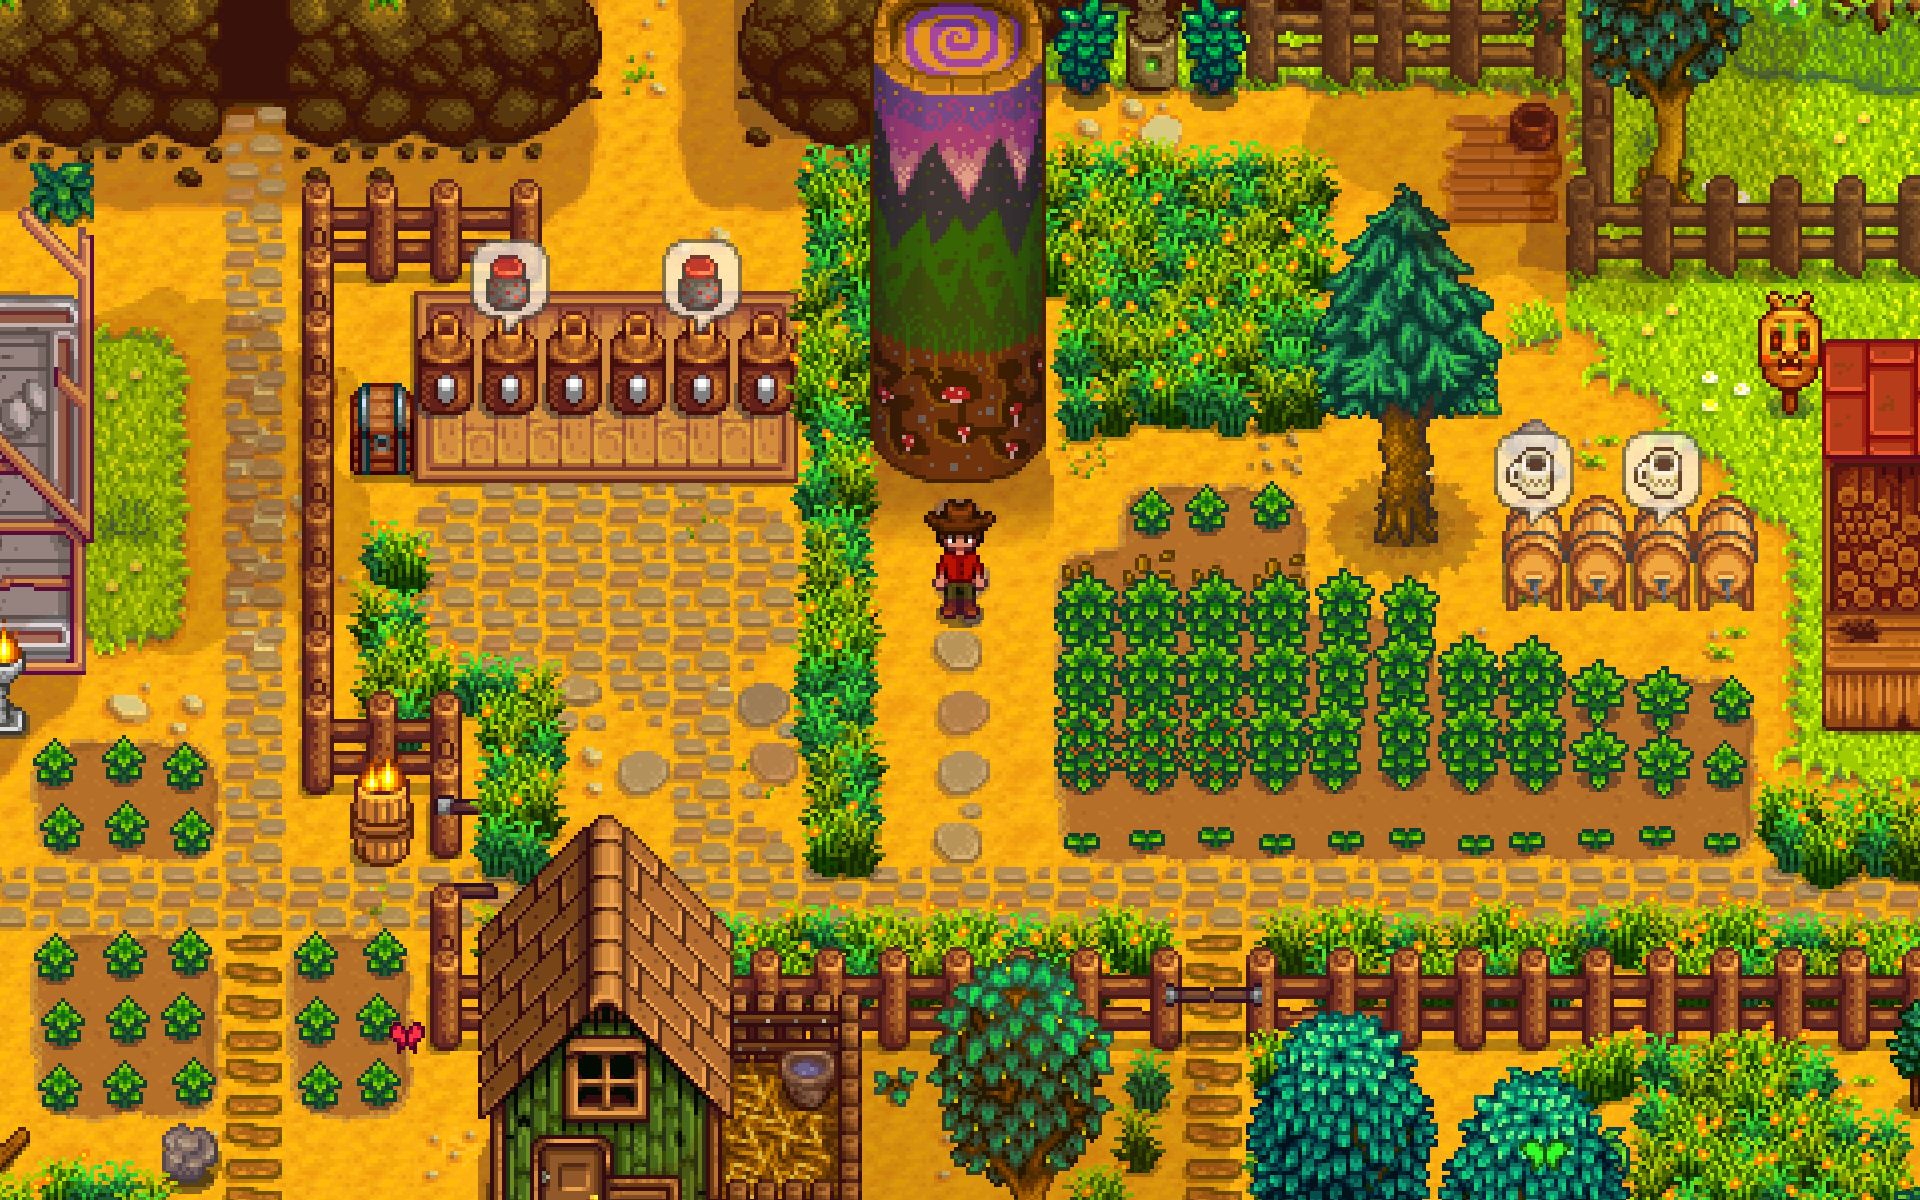 Stardew Valley release date info coming today The GoNintendo Archives